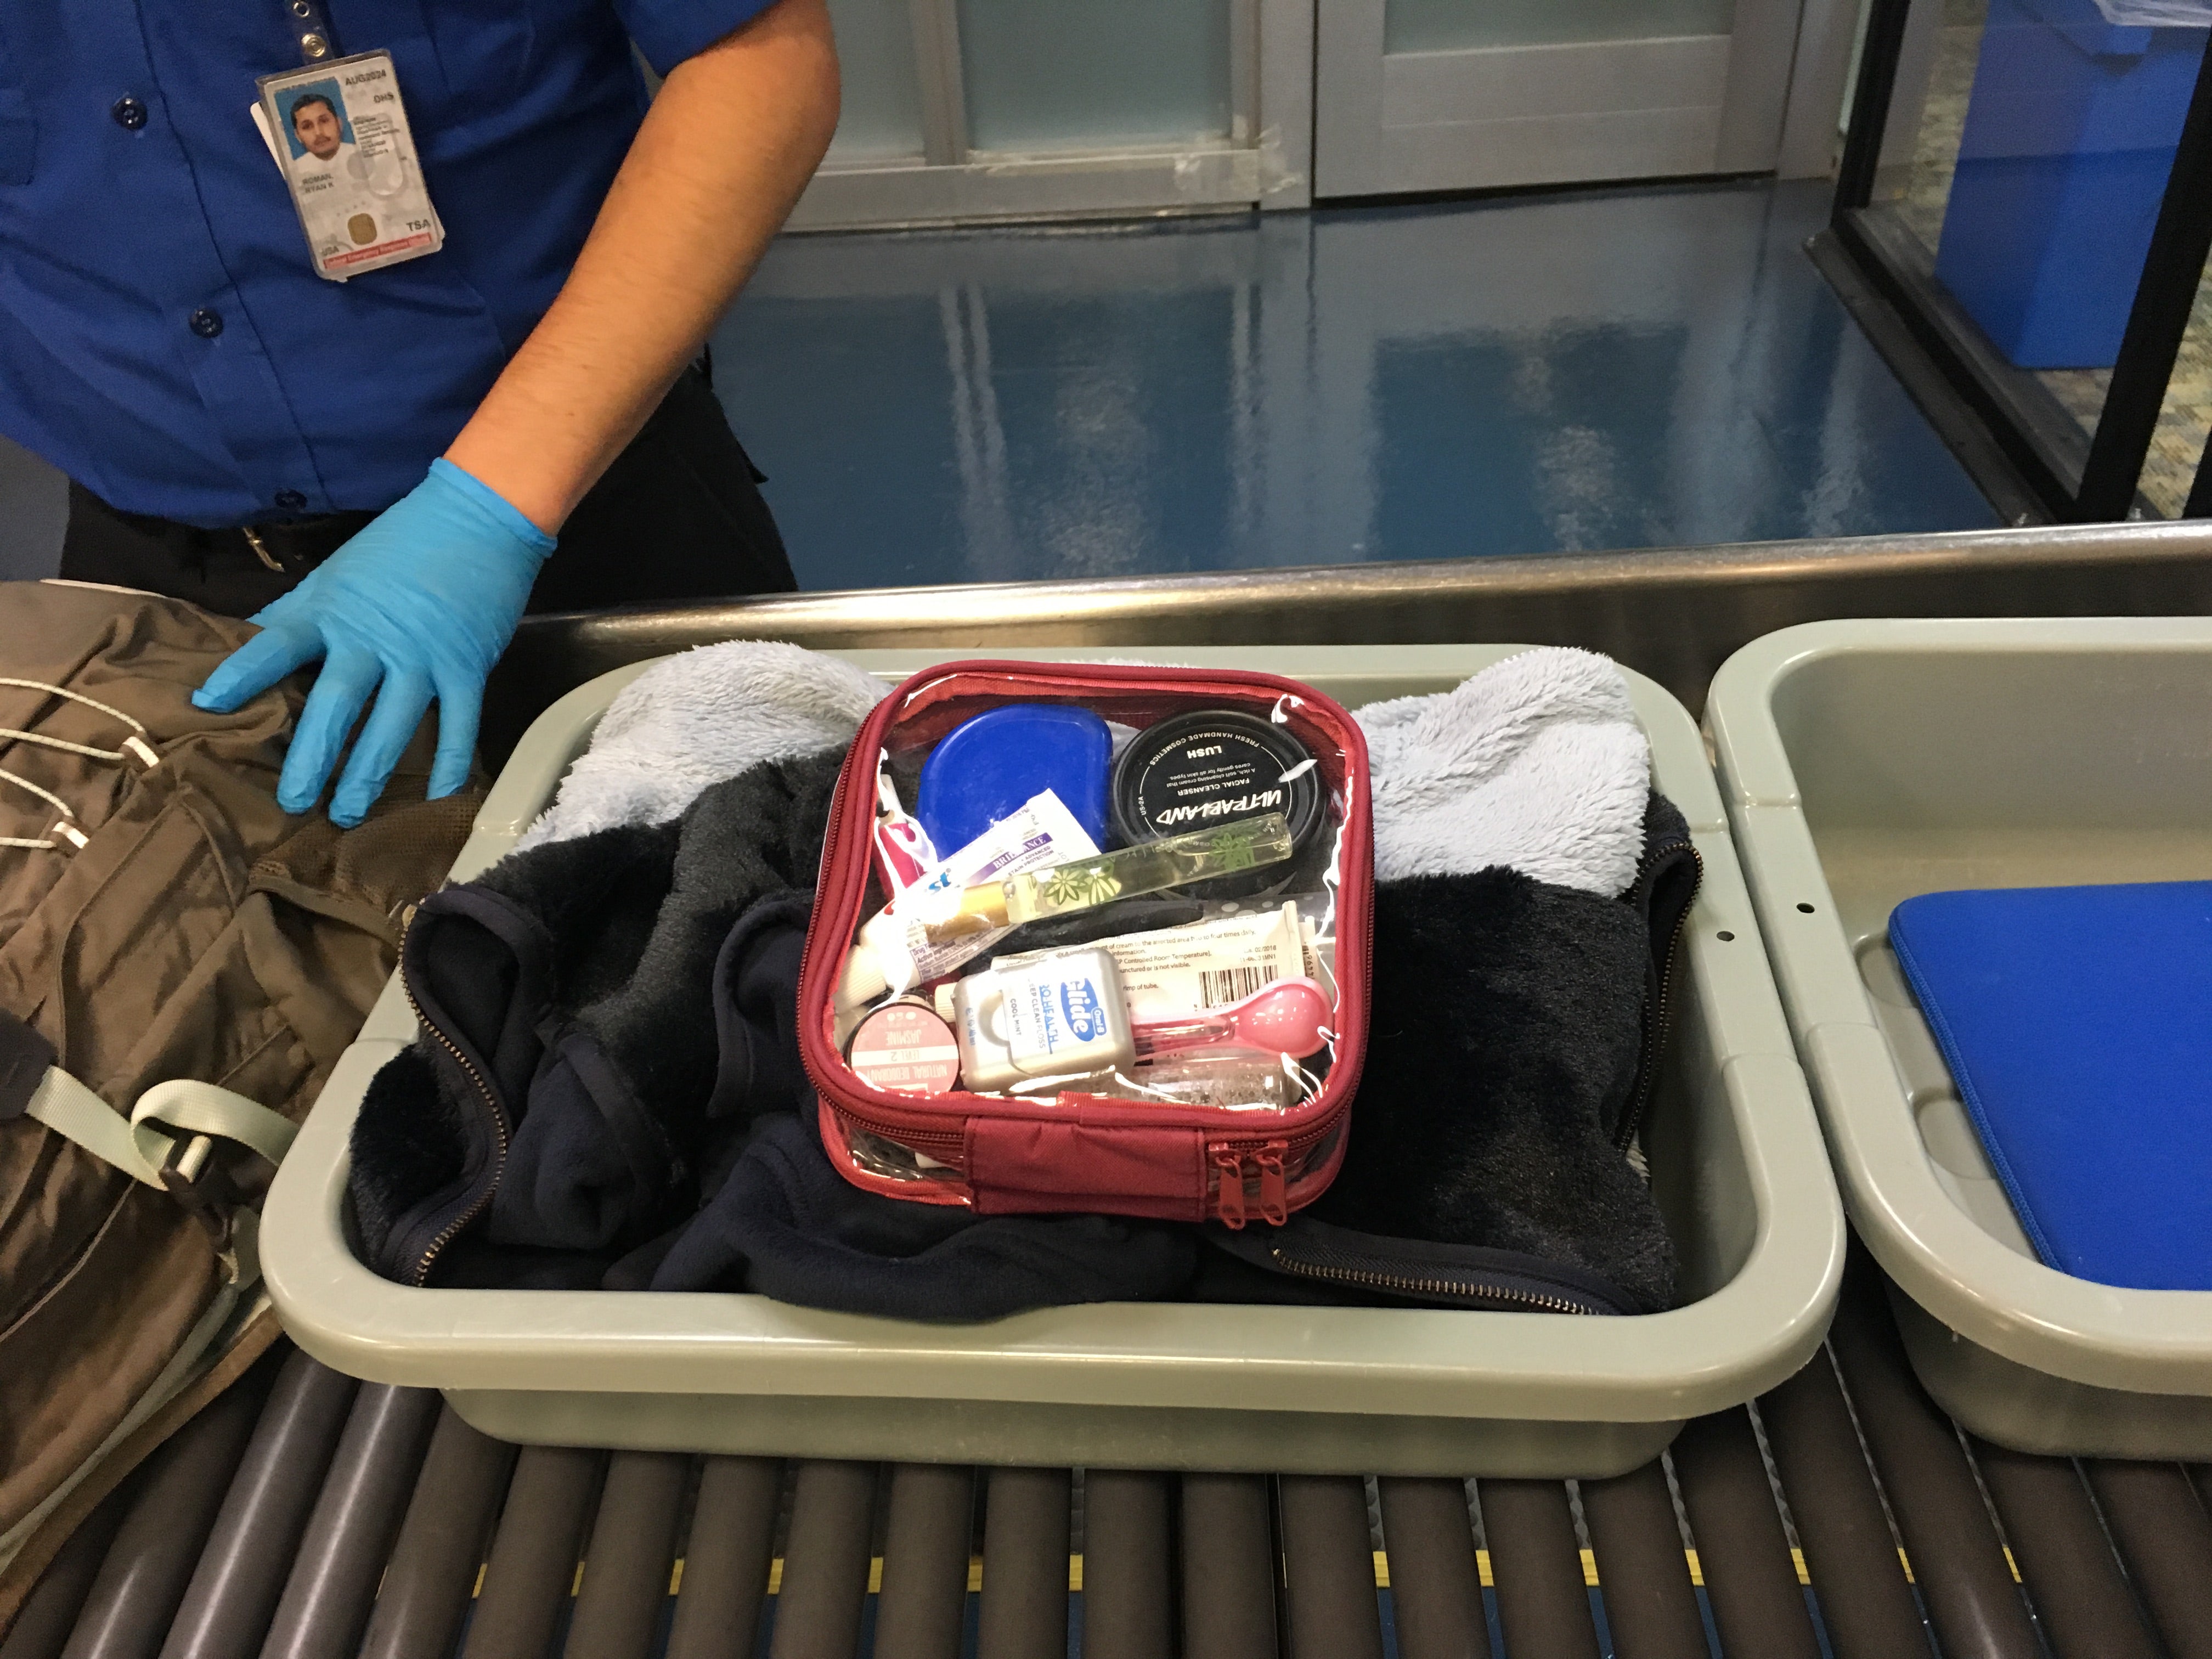 TSA Approved Toiletry Bag for traveling